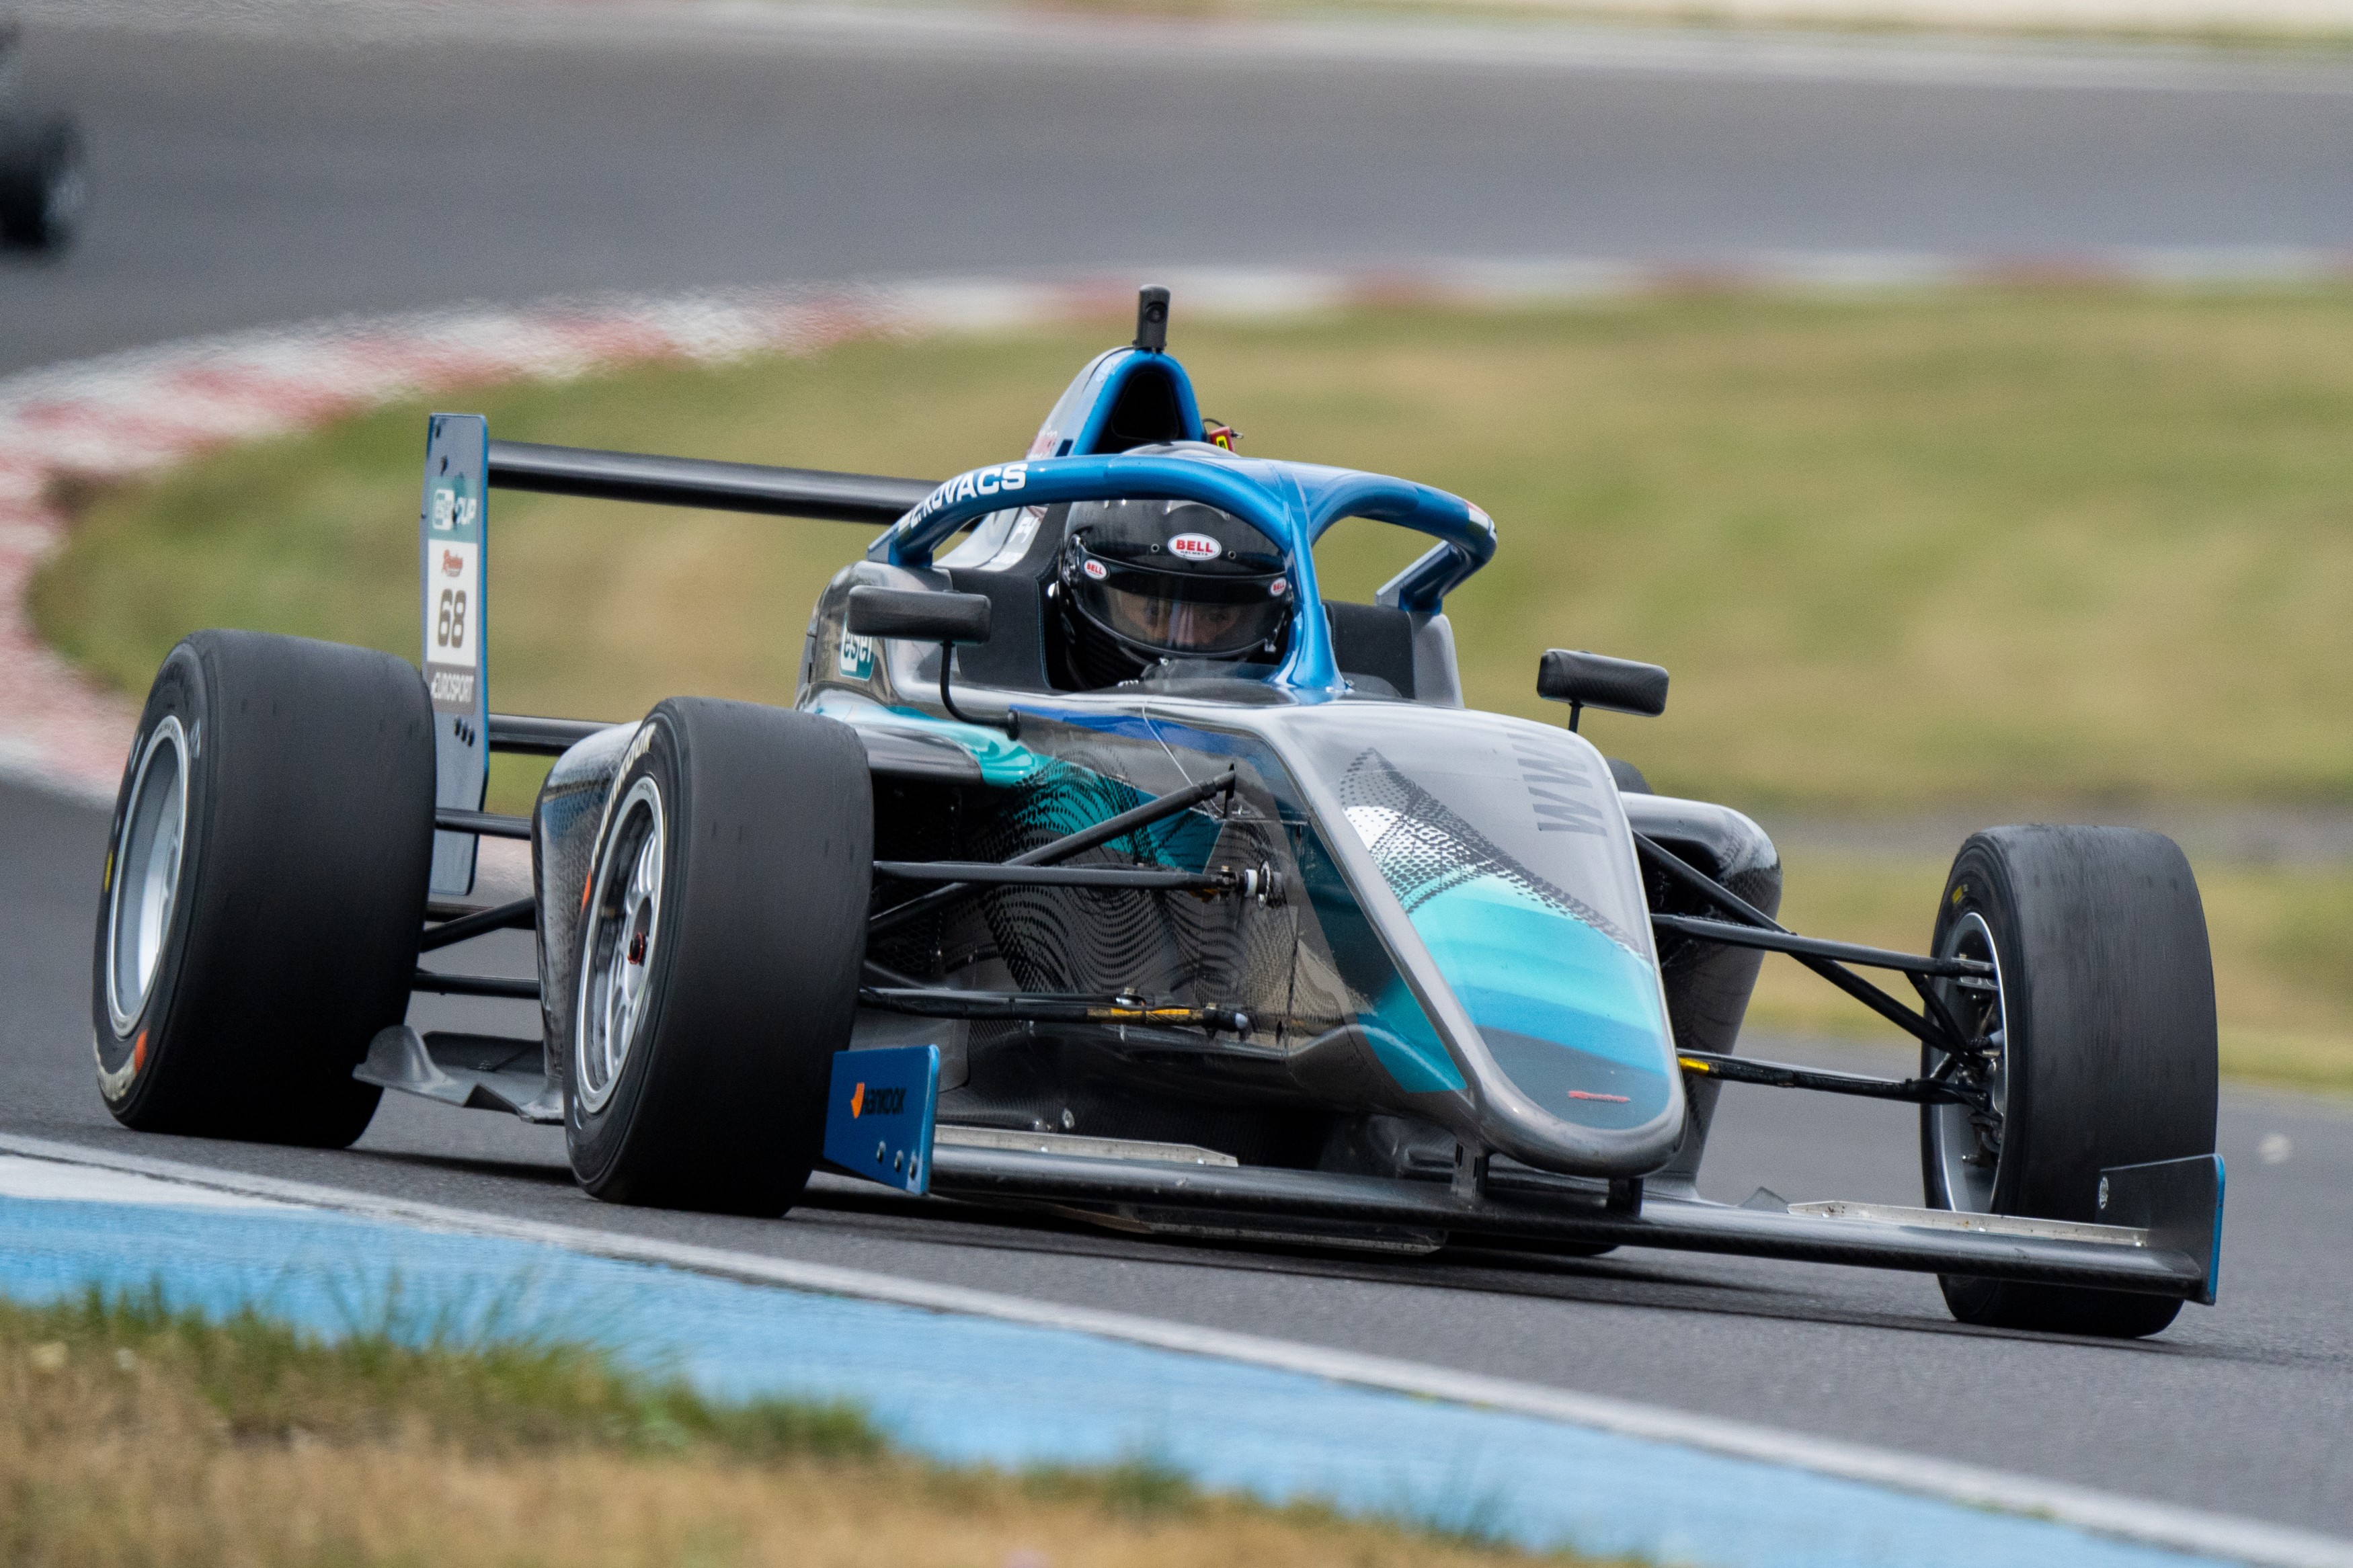 ACCR F4 starts as a certified FIA Formula 4 racing series in 2023!